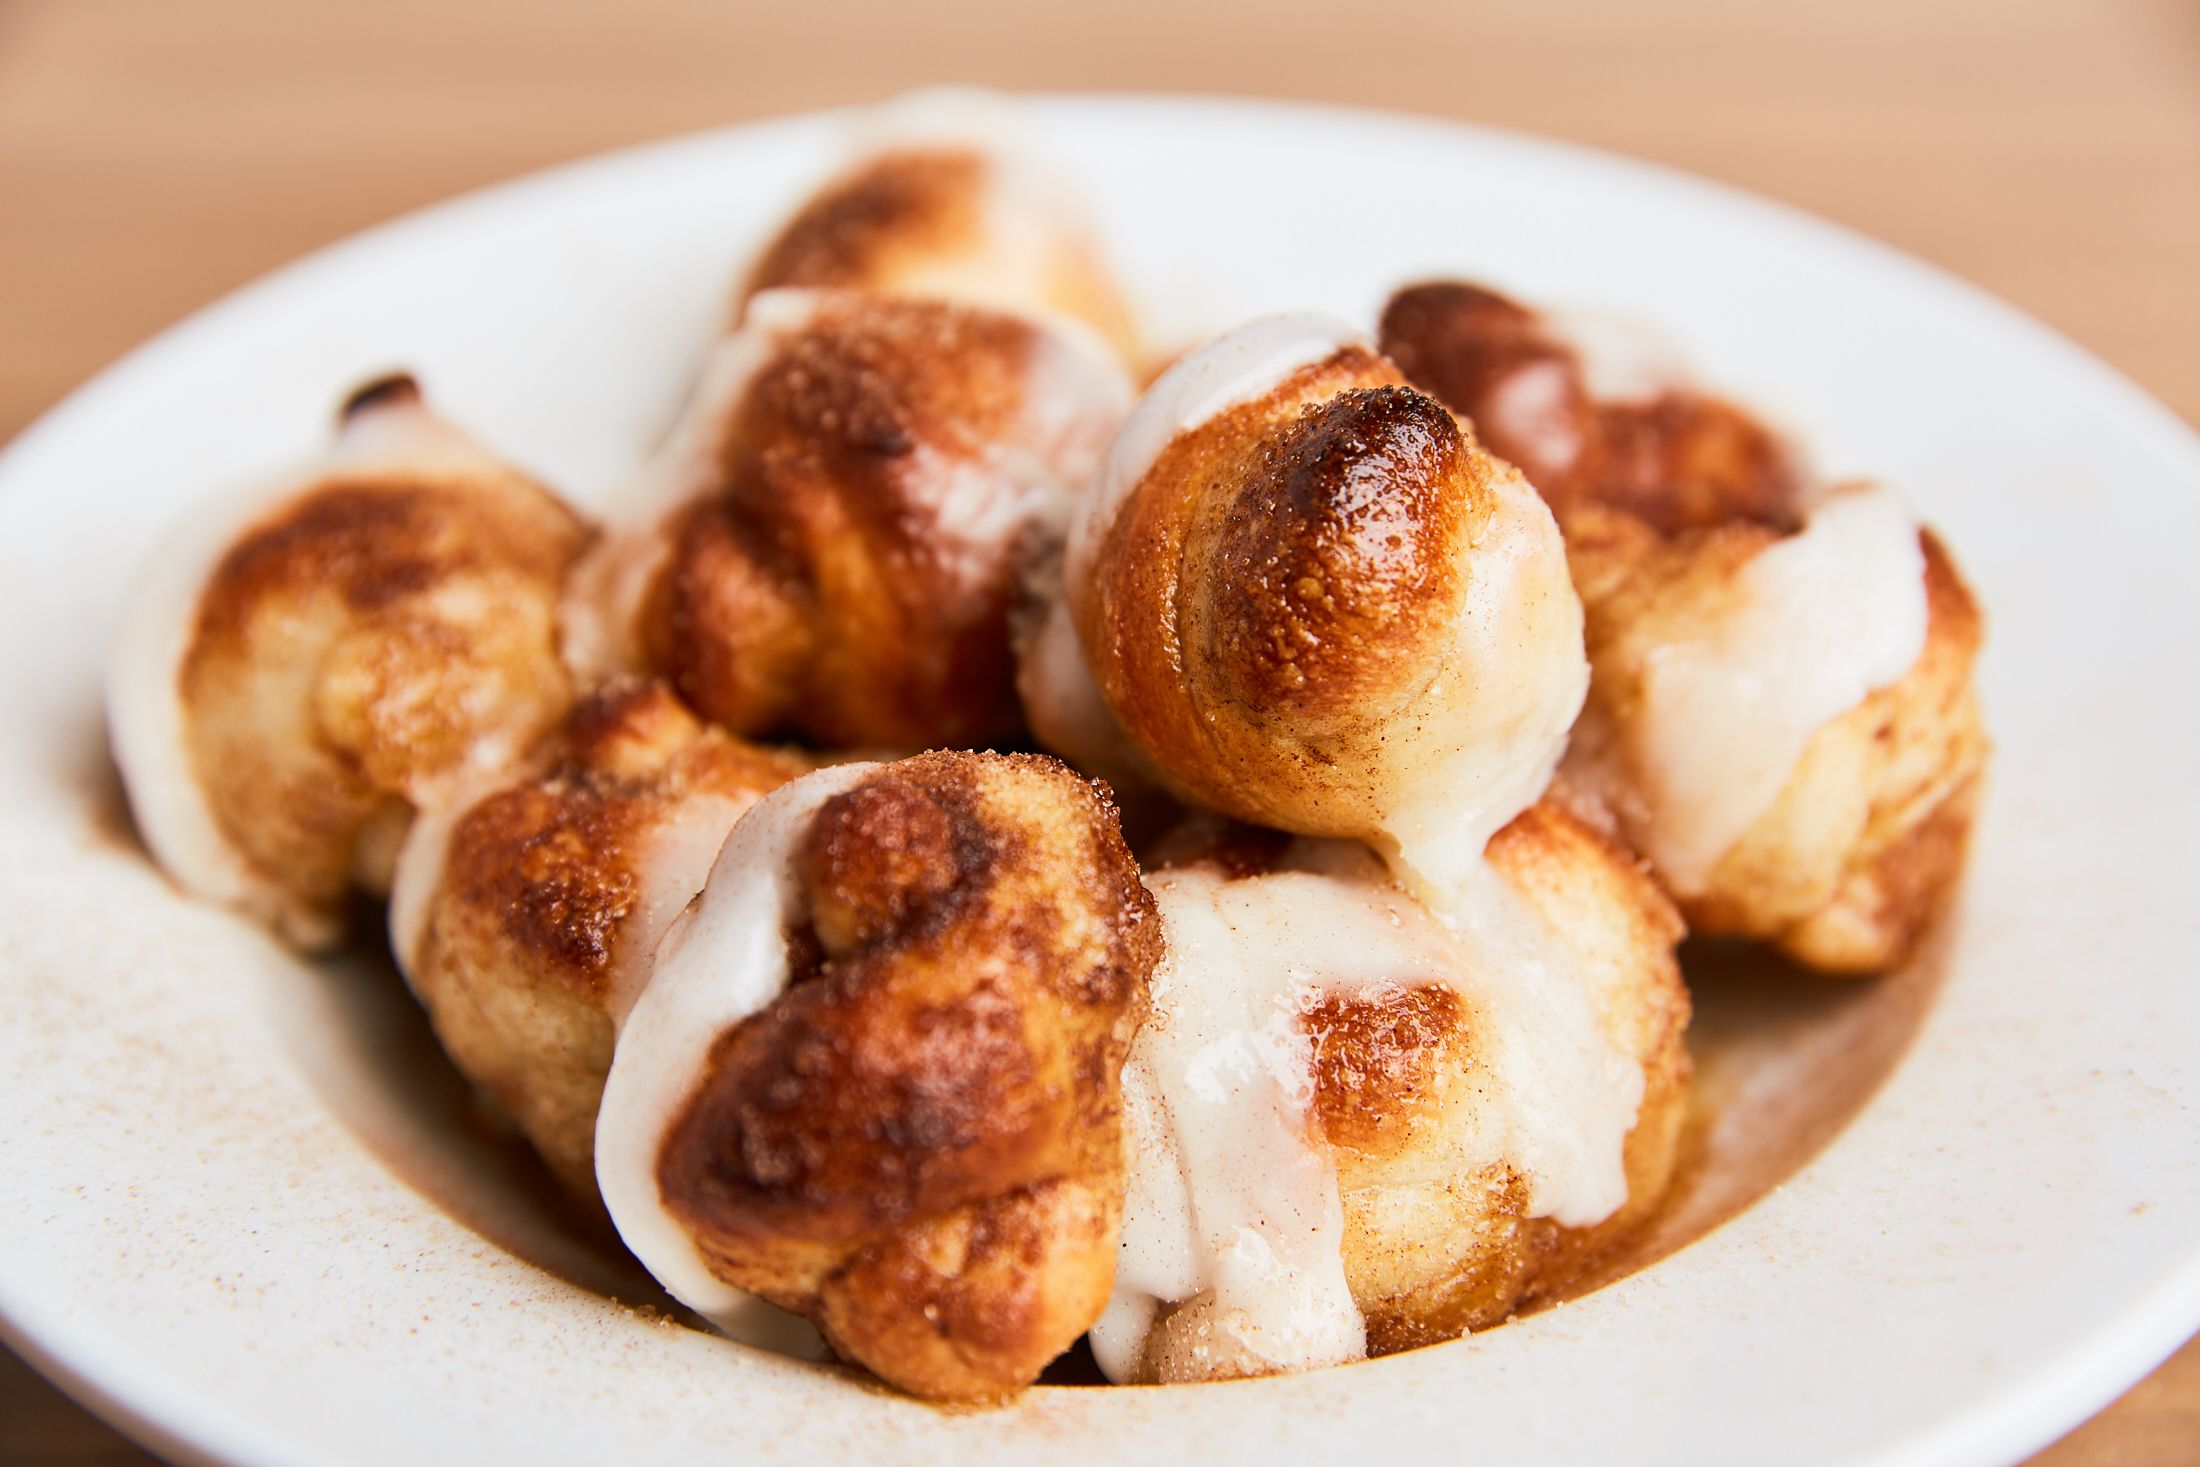 CINNAMON KNOTS (WITH ICING) - Our homemade dough knots with butter and sprinkled sugar and cinnamon. Topped with icing.